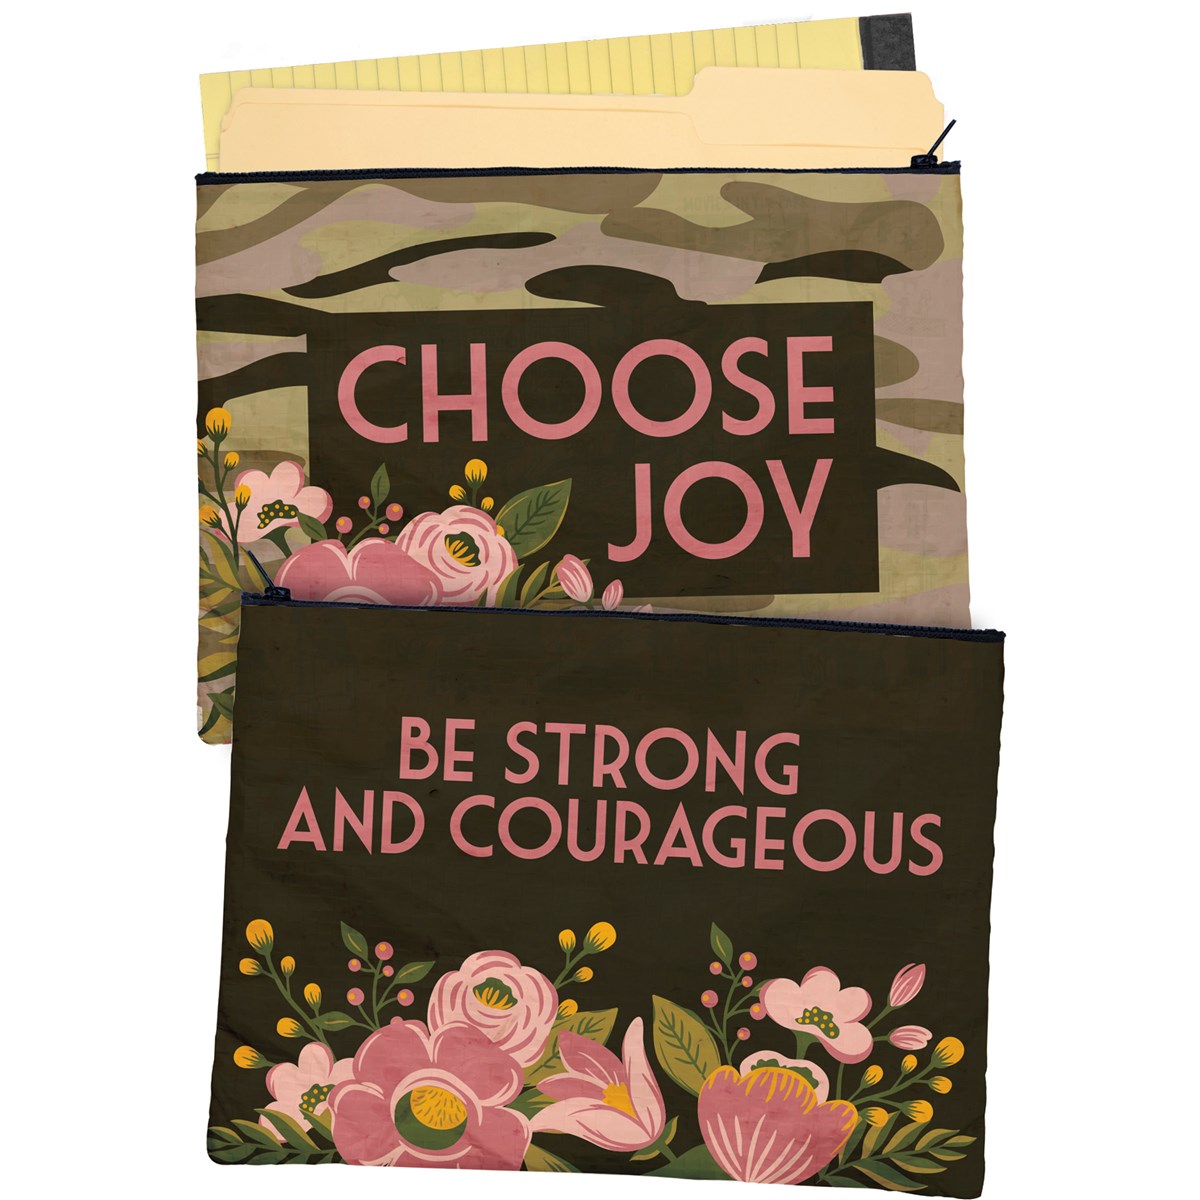 Be Strong And Courageous Zipper Folder - Post-Consumer Material, Plastic, Metal